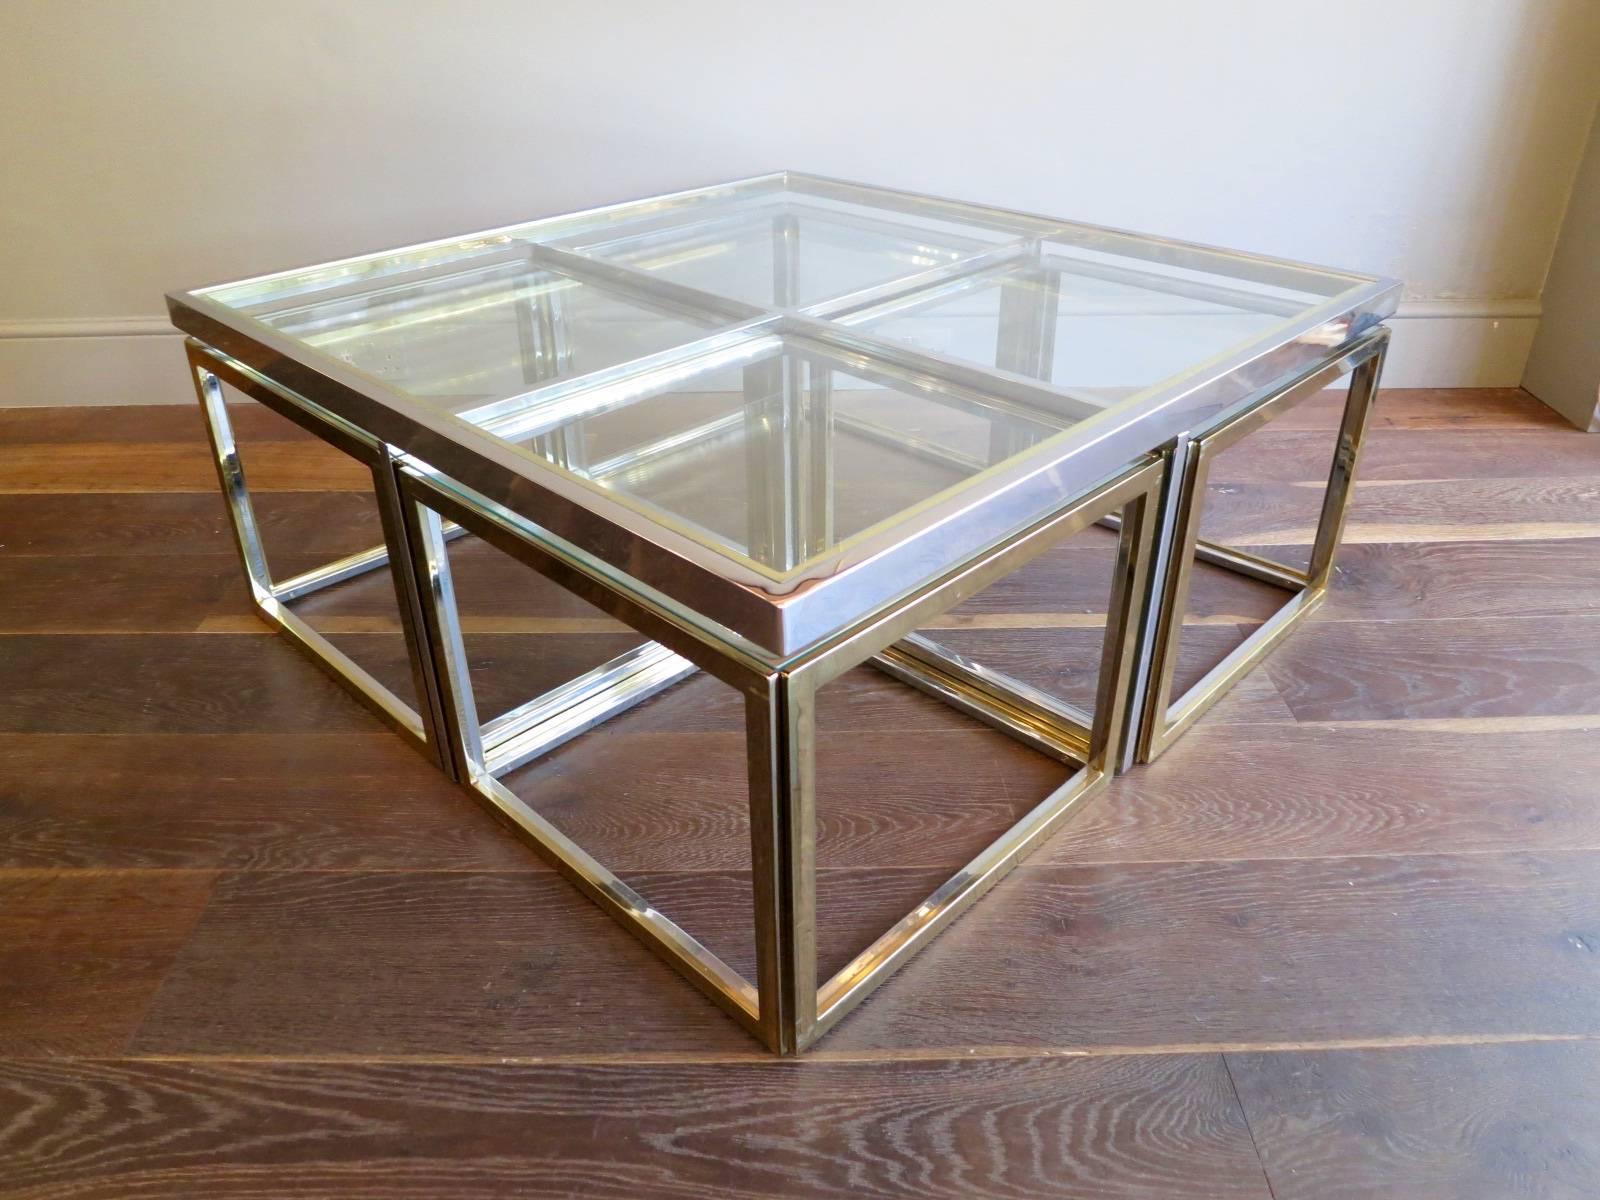 A large square cocktail table with four cubed side tables inside, all in brass and chrome. A very versatile and functional table. Designed by Jean Charles Paris 

The side tables sizes are 50.75 cm x 50.75 cm x 38 cm.